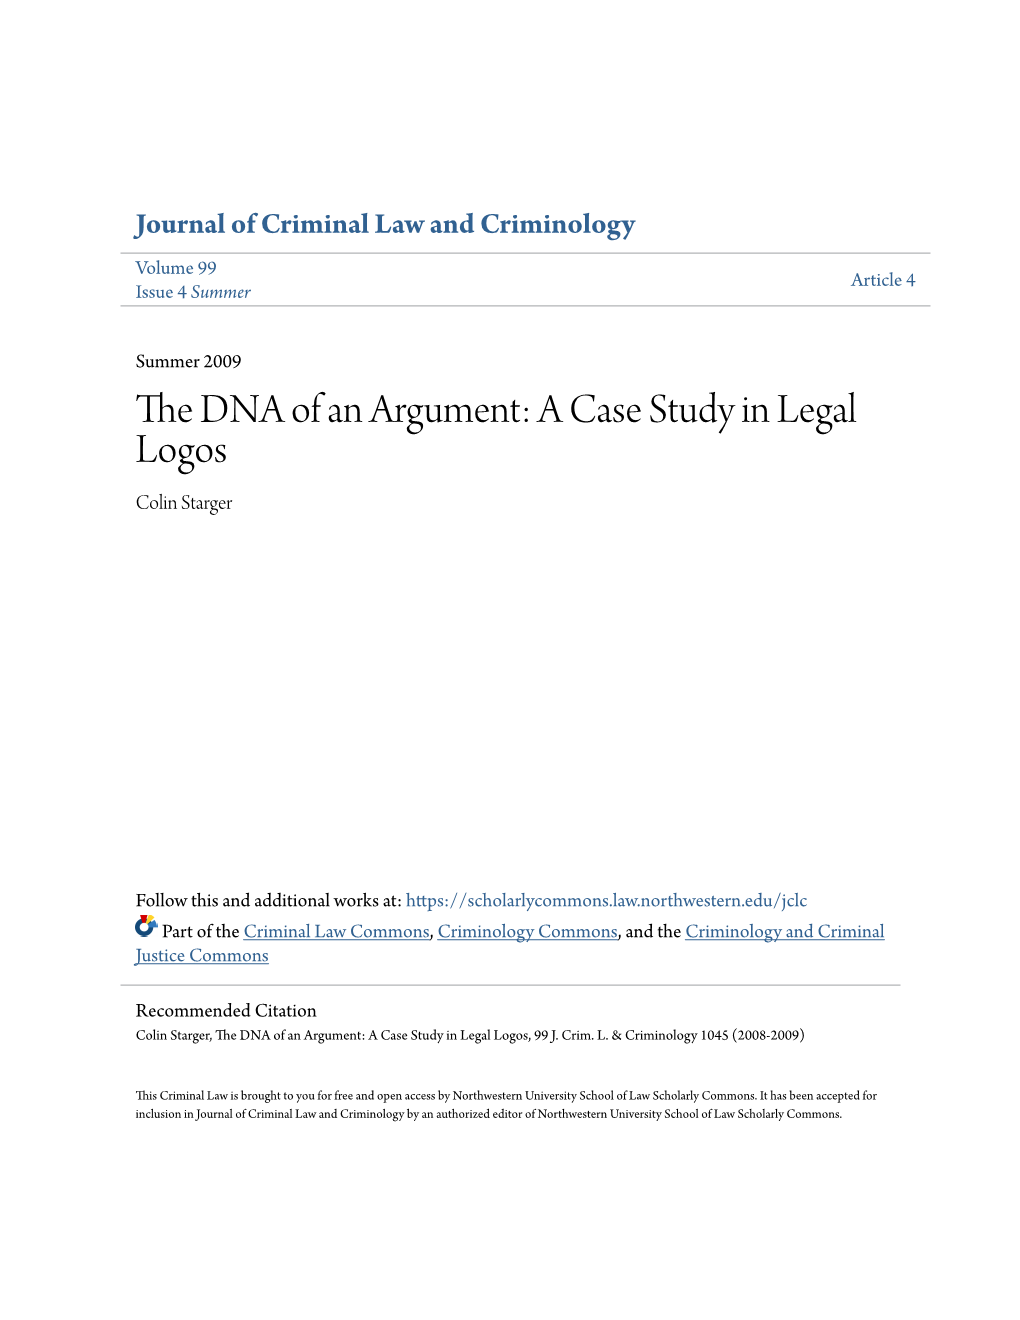 The DNA of an Argument: a Case Study in Legal Logos Colin Starger